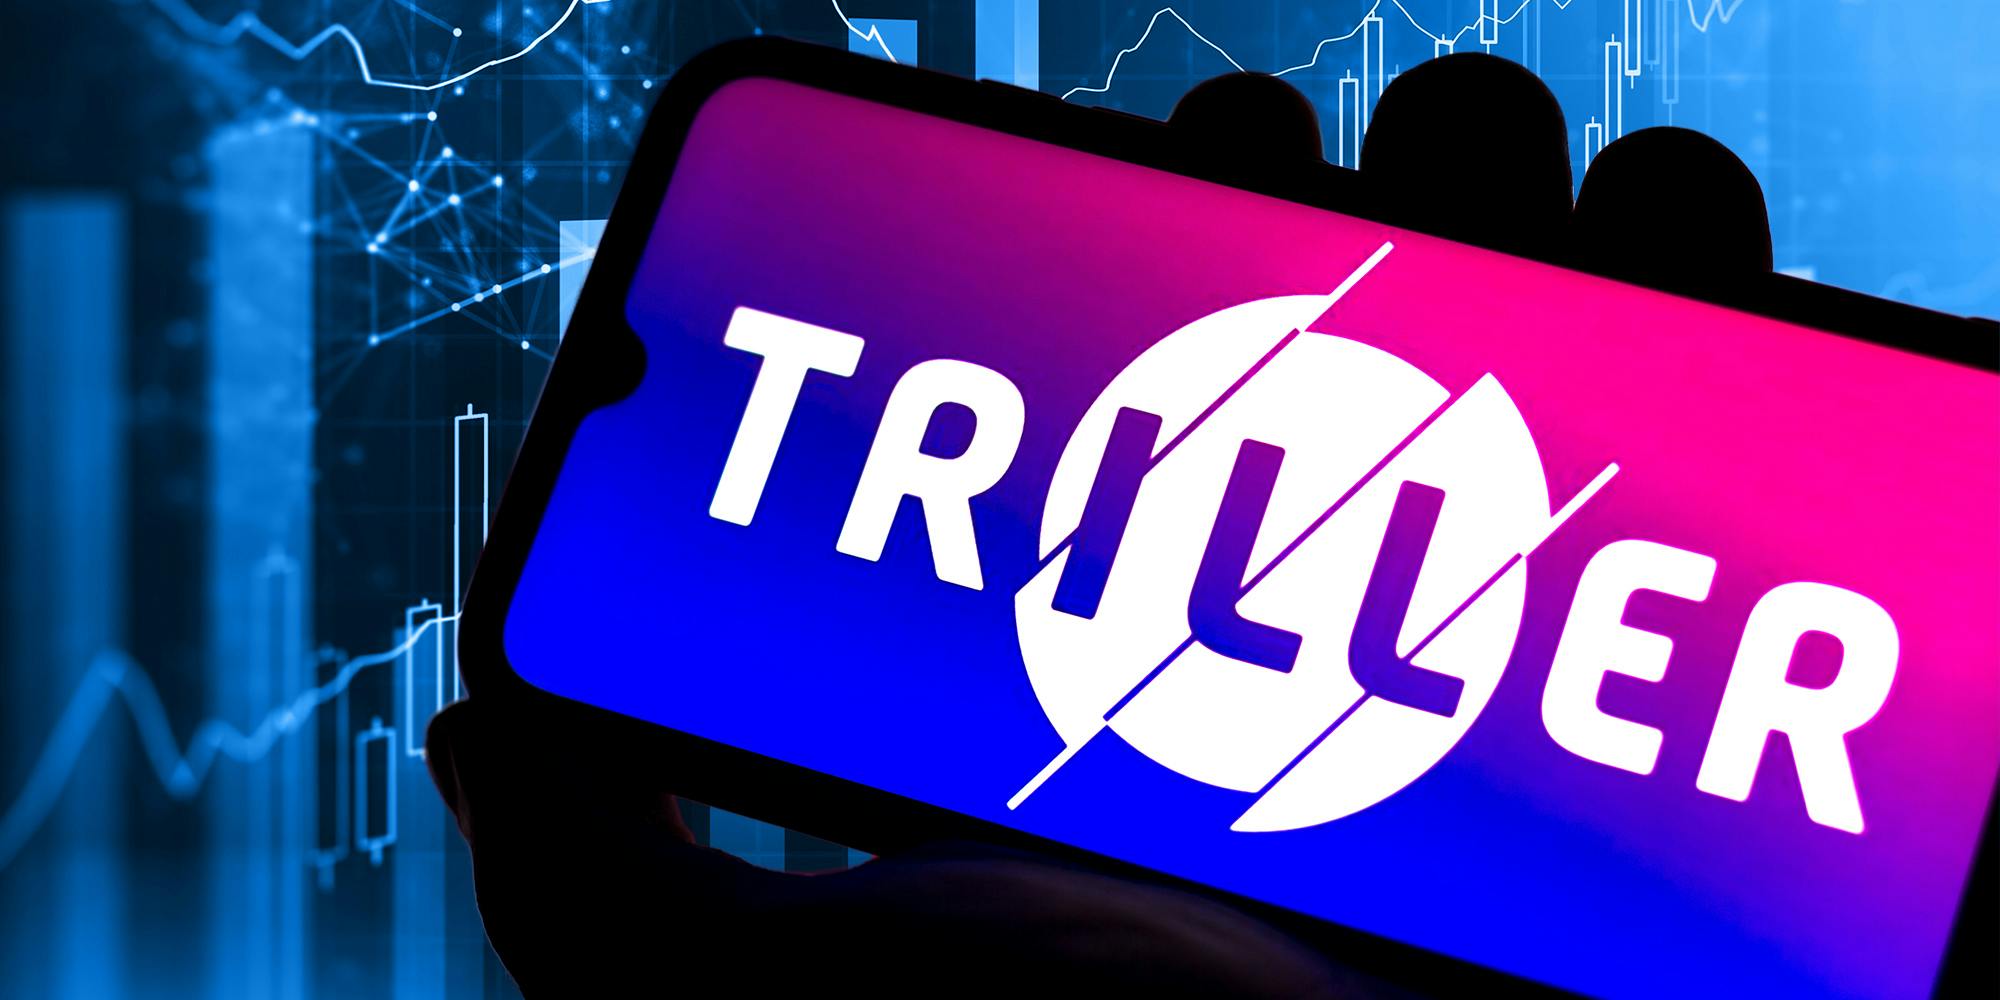 Triller Is Going Public: Here’s Why Its Creators Should Care